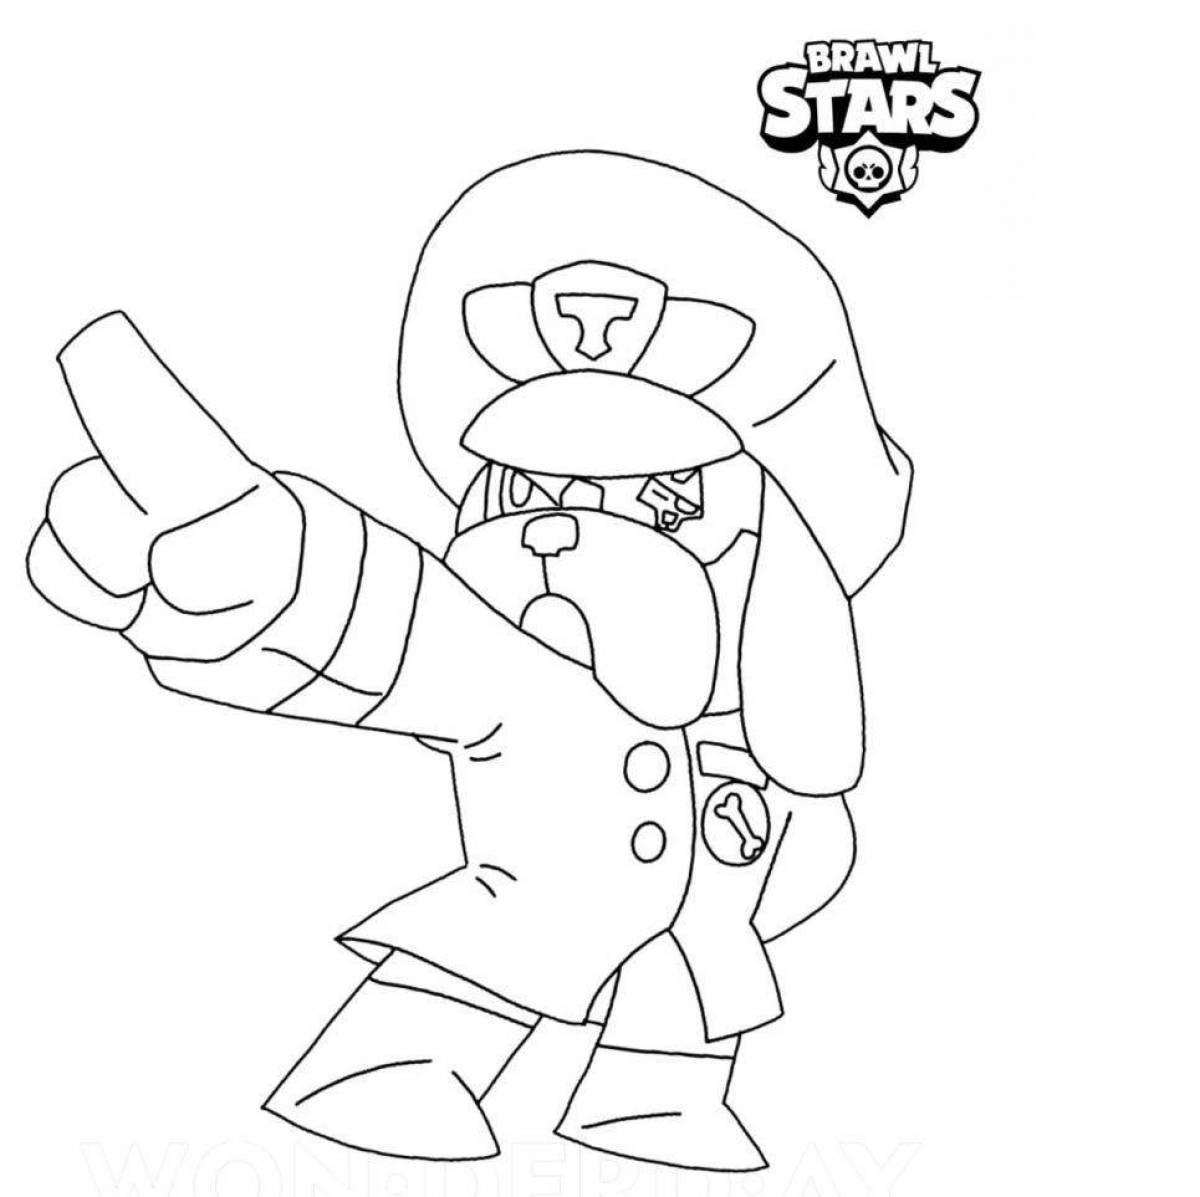 Playful chester from brawl stars